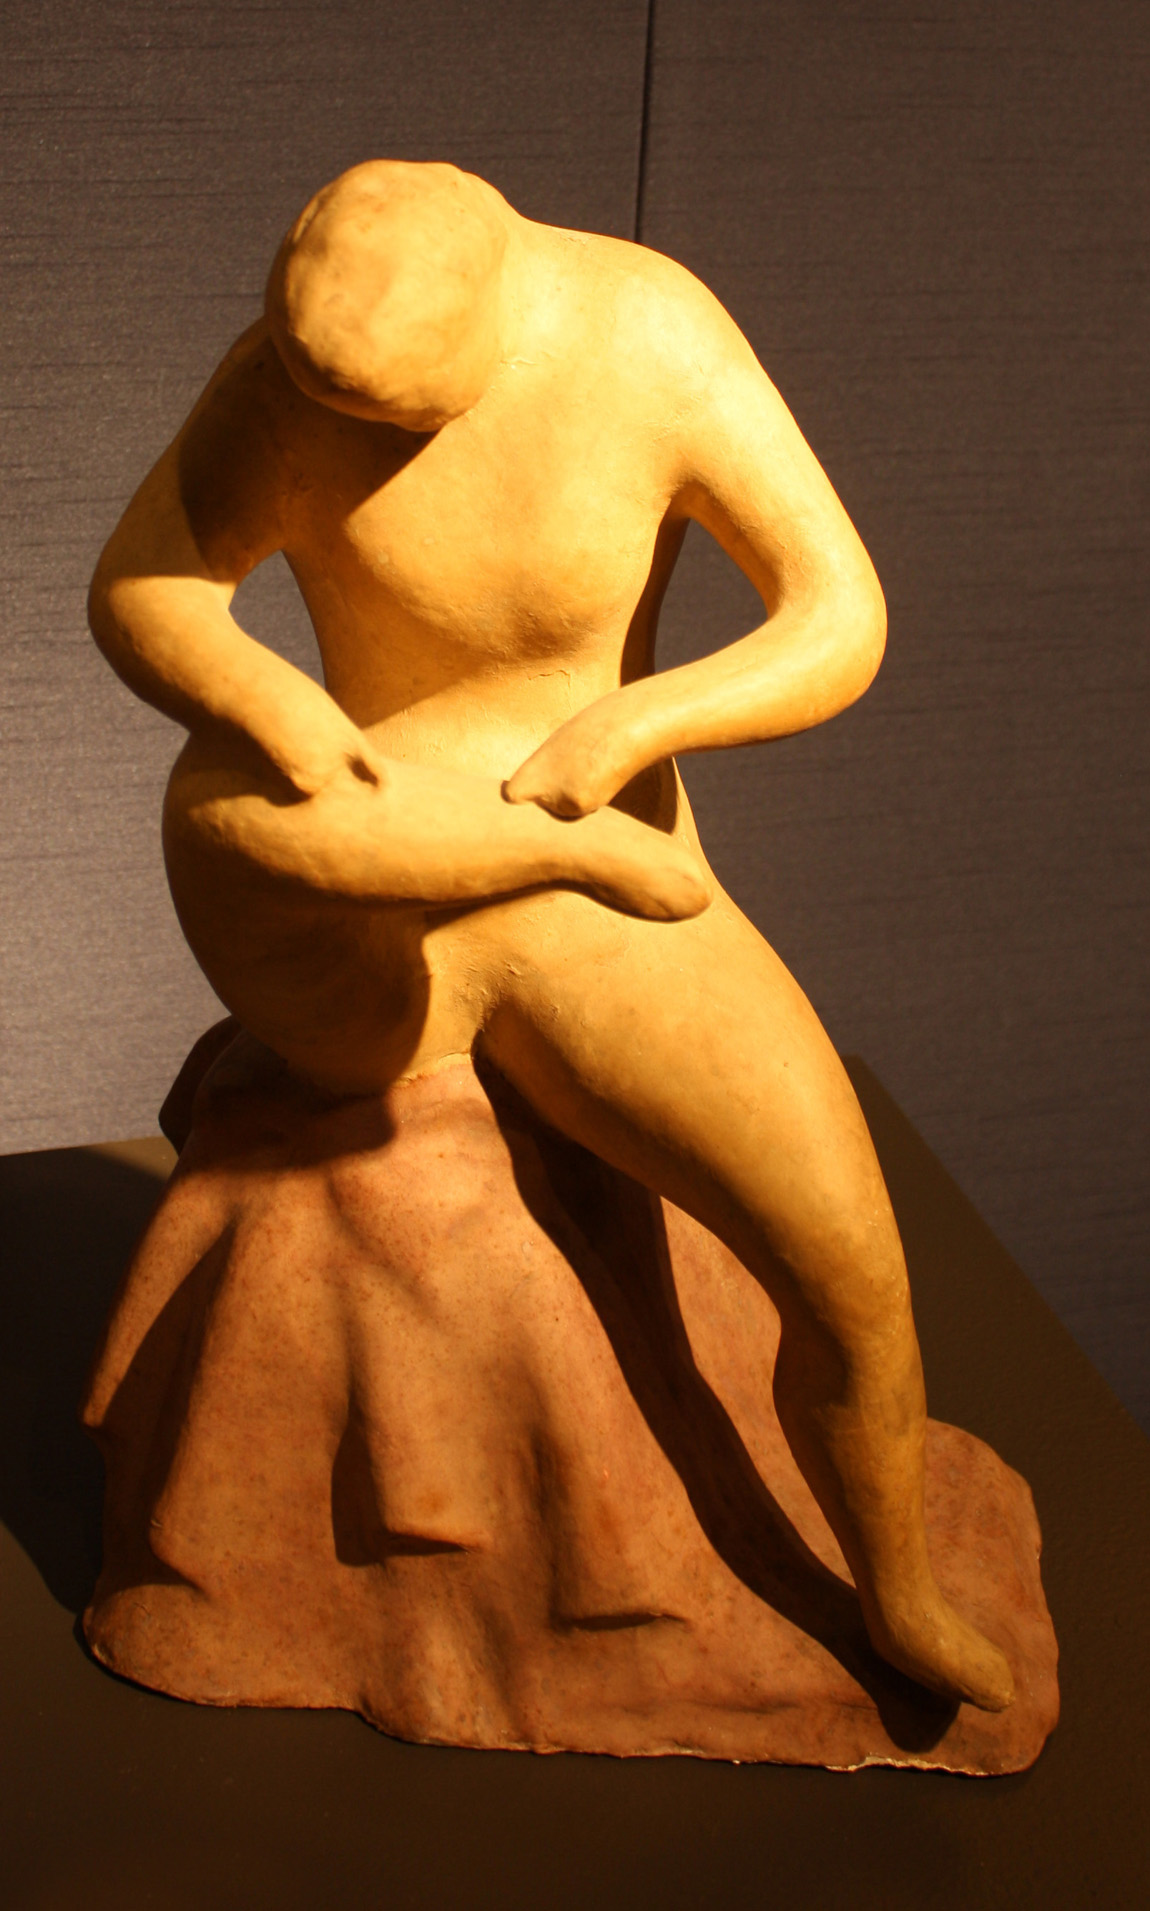 Tom Vieilleux Gallery, Portland, Maine, showed Elie Nadleman’s painted plaster “Seated Figure.”